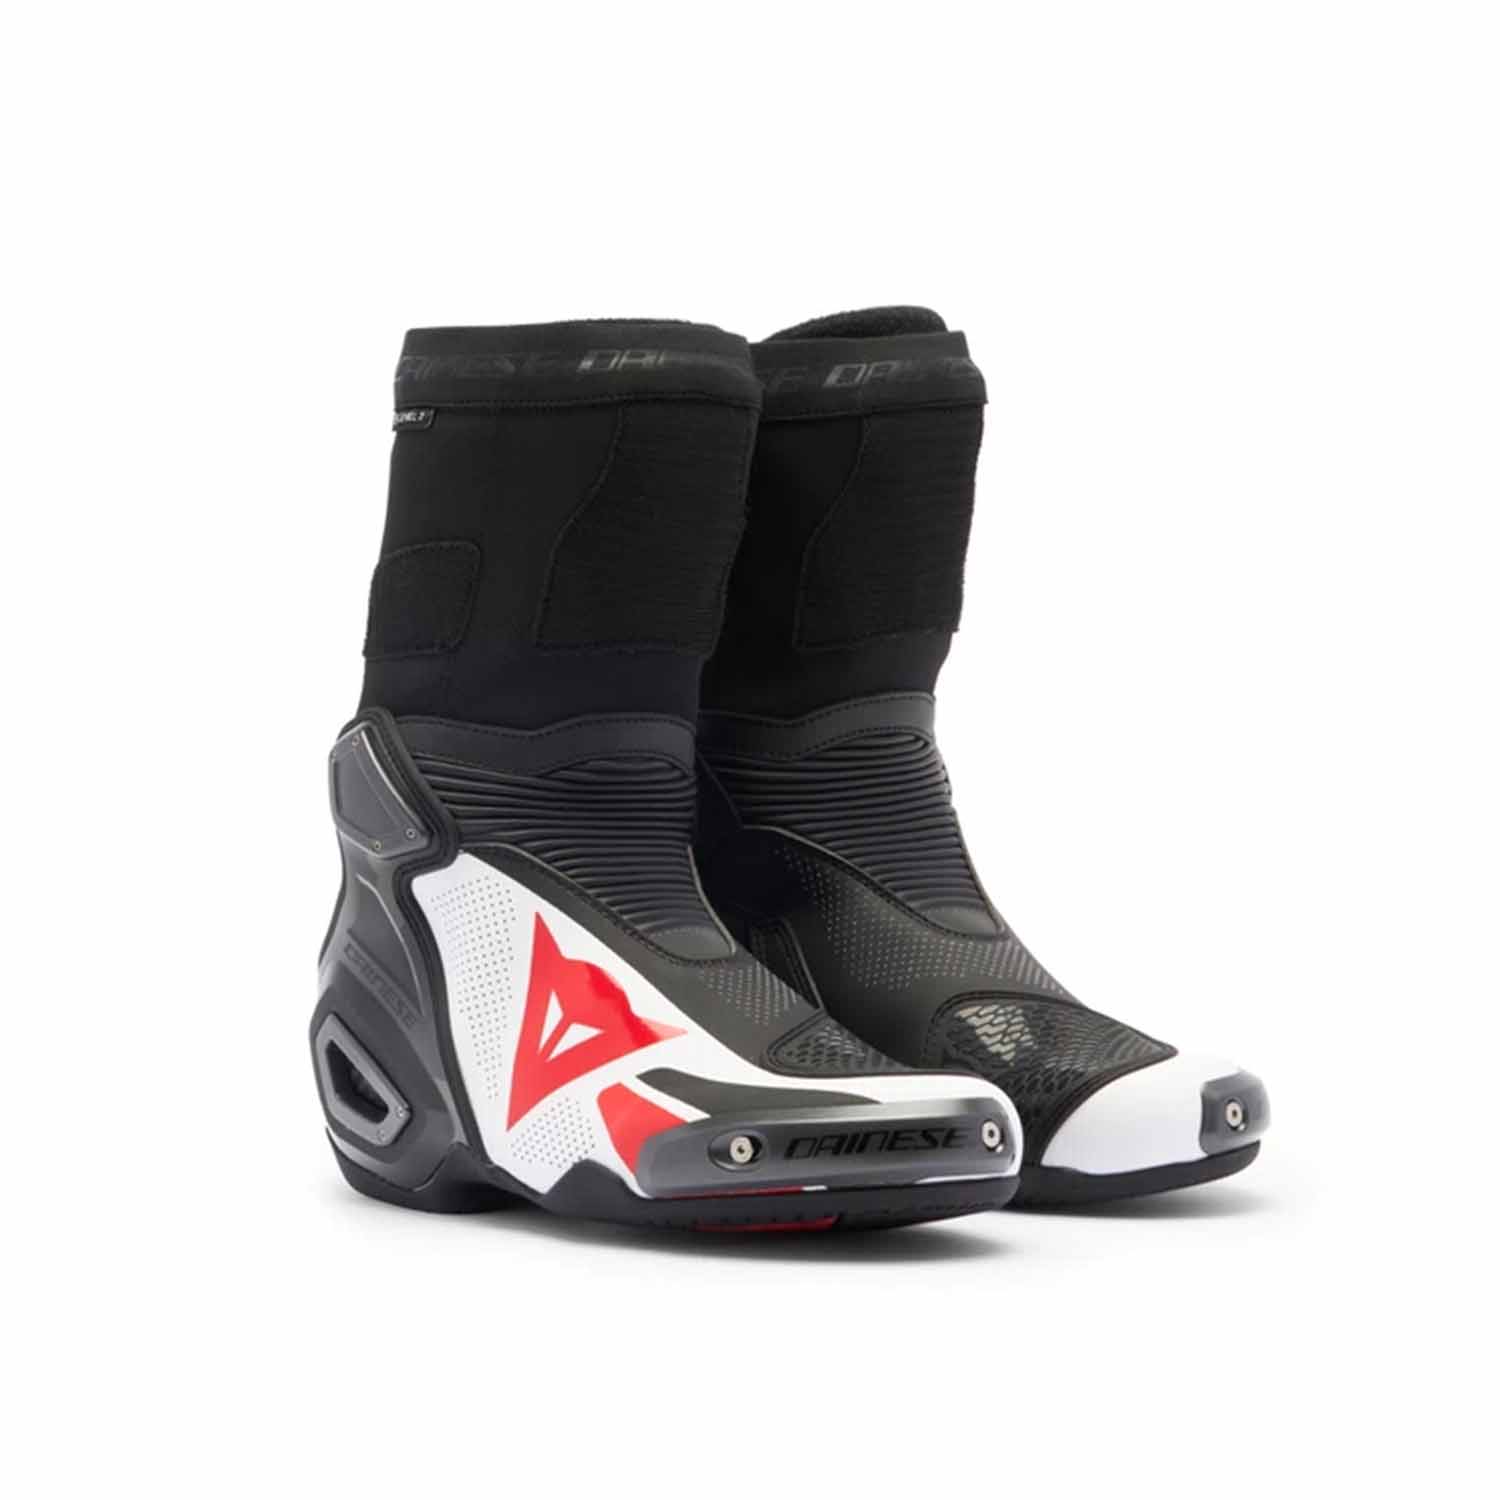 Image of Dainese Axial 2 Air Boots Black White Lava Red Größe 43